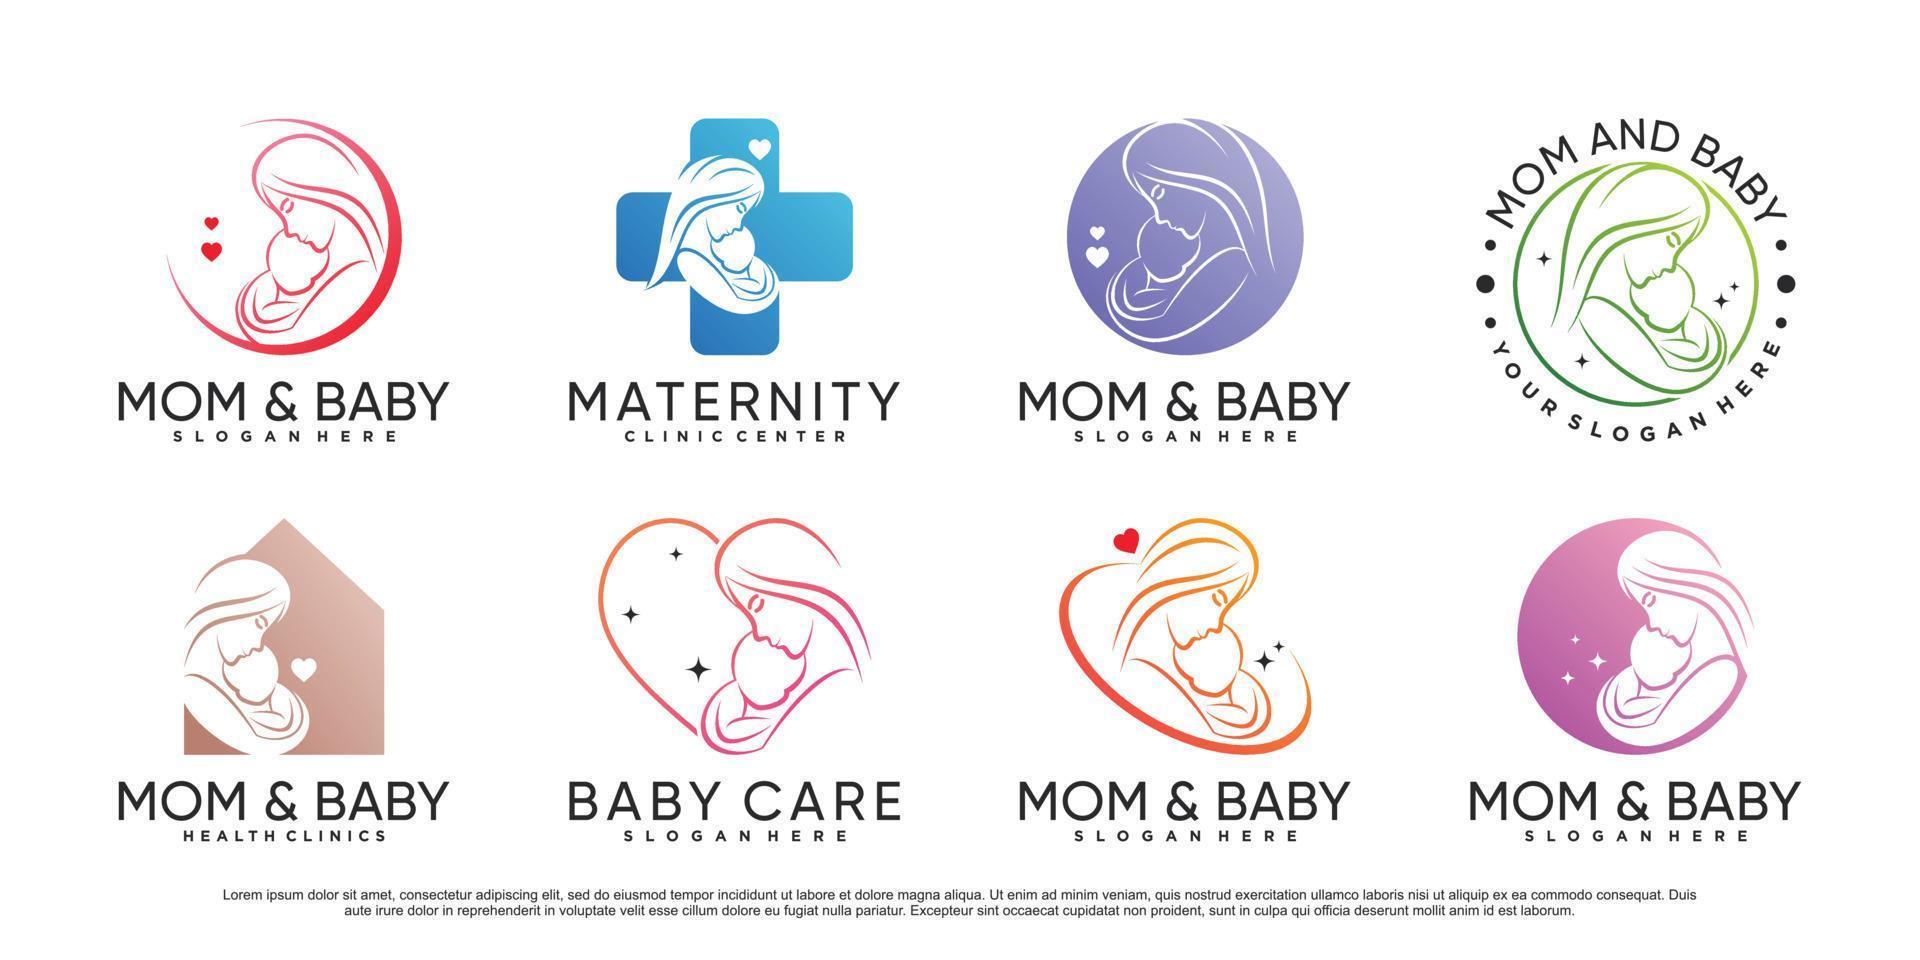 Mom and baby icon set logo design template with creative element Premium Vector